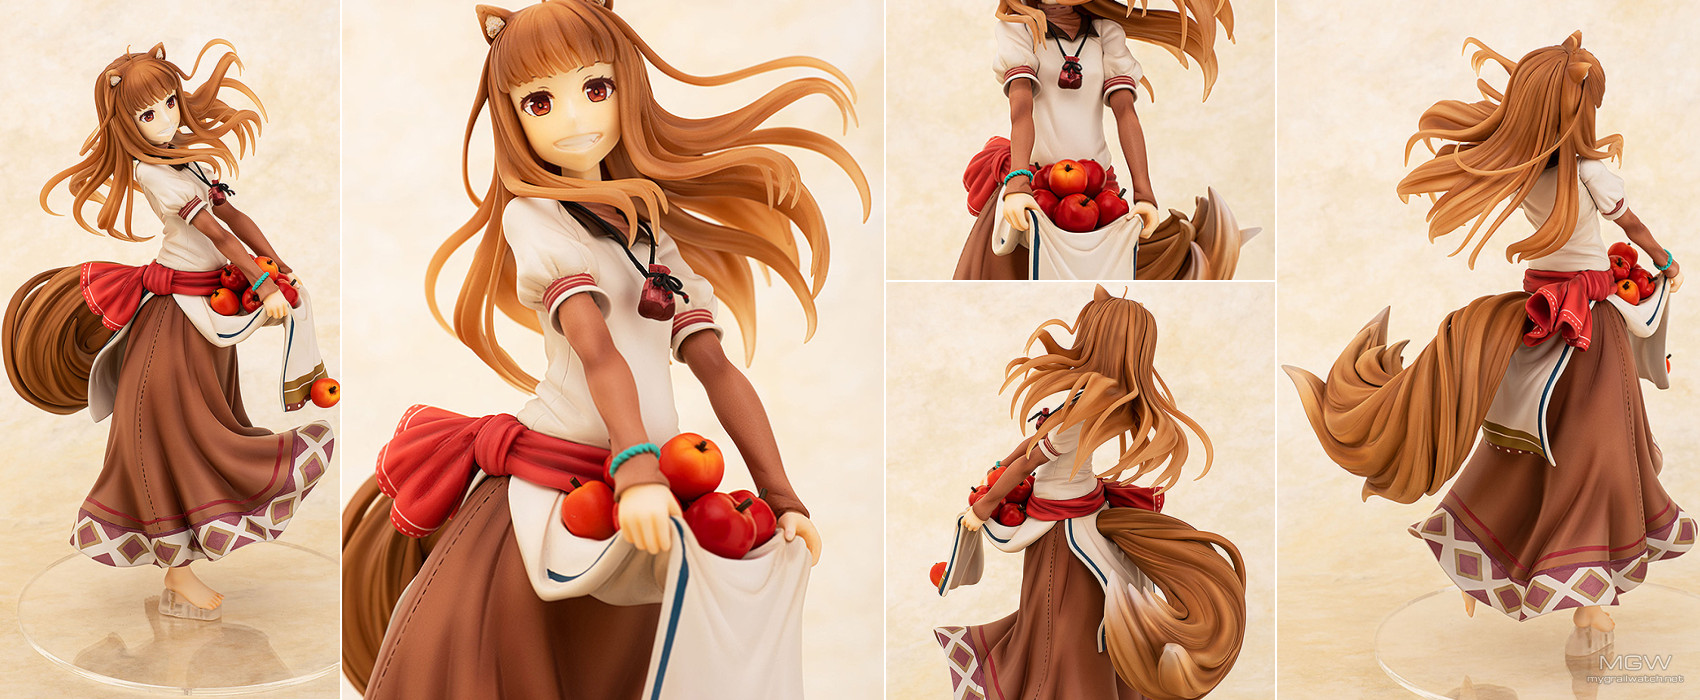 Holo Plentiful Apple Harvest Ver. by Chara Ani from Spice and Wolf